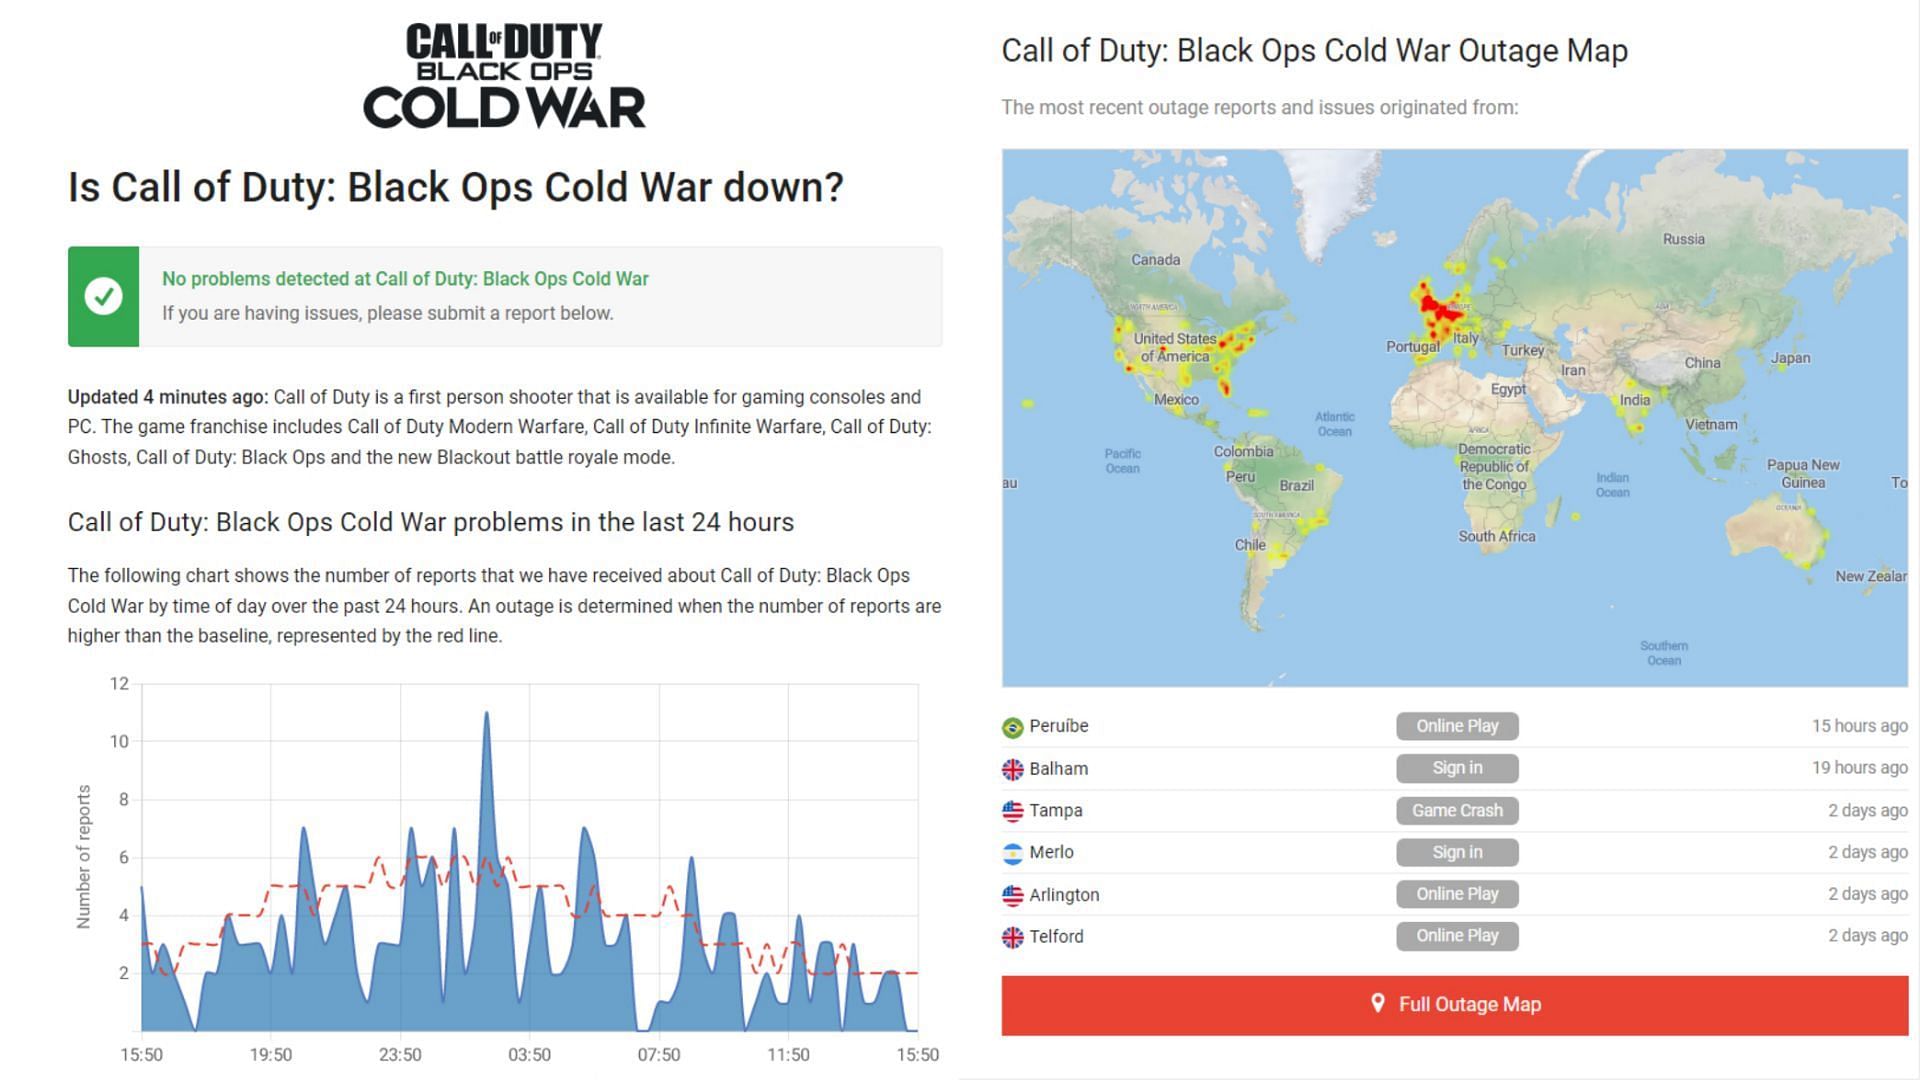 The istheservicedown.in page for Black Ops Cold War (Image via Activision)